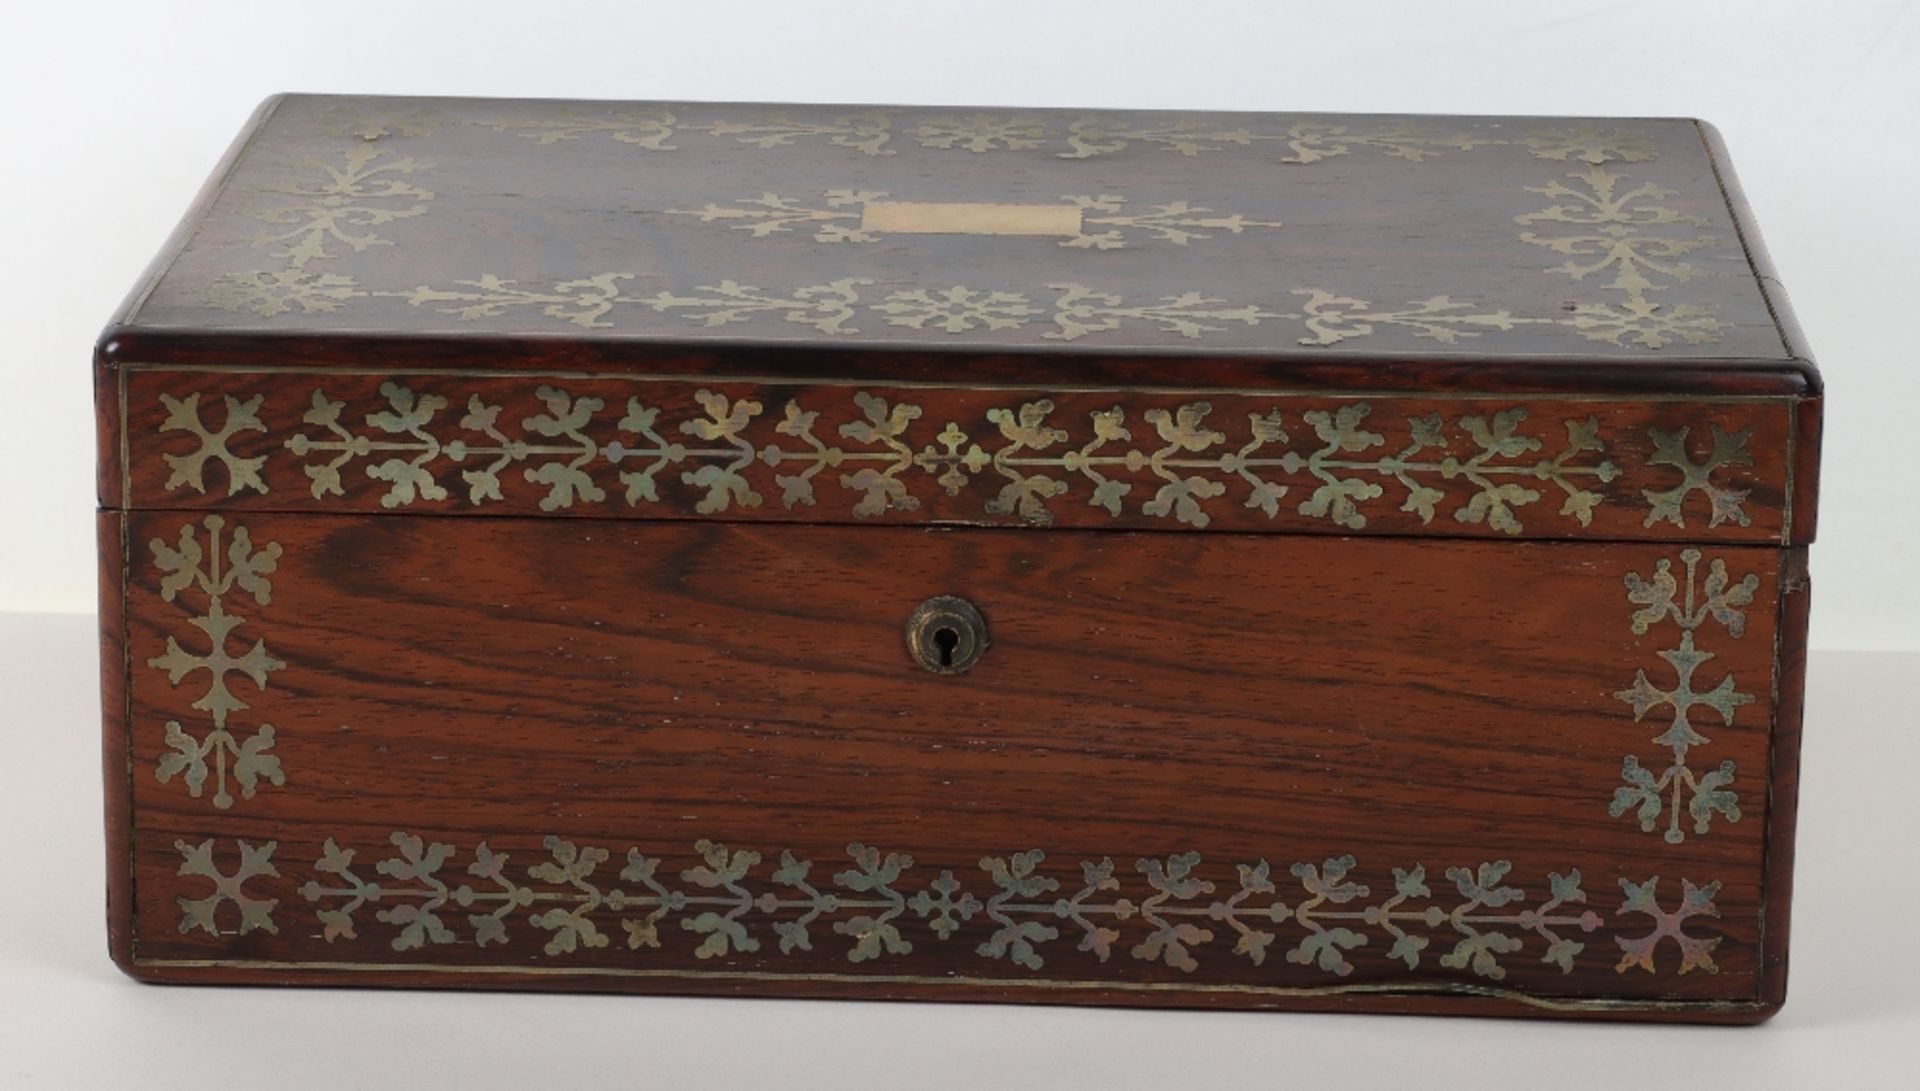 A late 18th century rosewood and brass inlay writing slop, in the manner of George Bullock